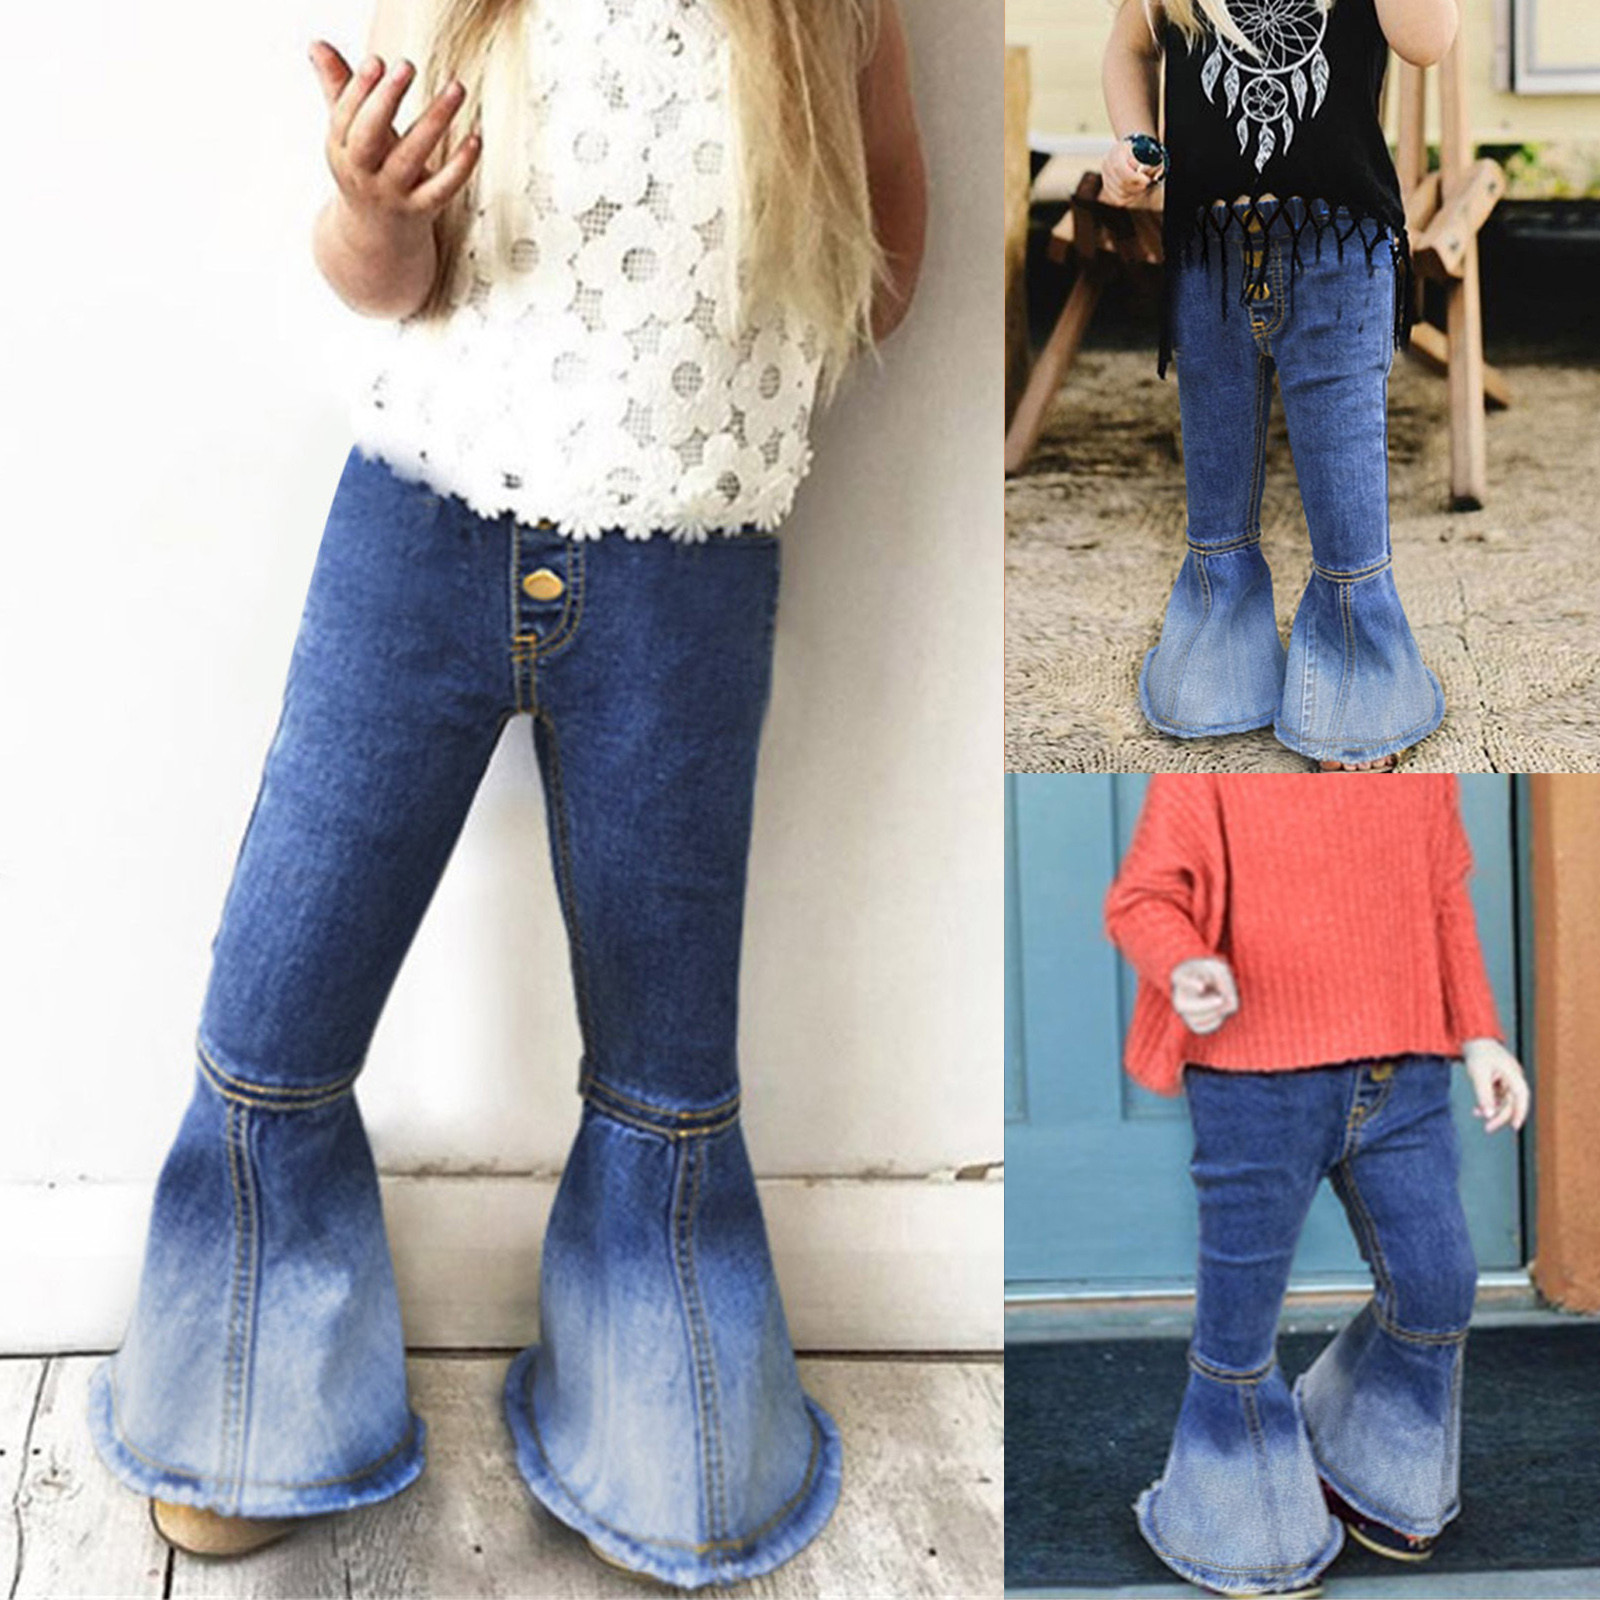 Flare Clothes Tassel Kids Jeans Baby Denim Trousers Girls Pants Toddler Pants Children Girls Pants Girls Clothes Size 6t Girls Sweatpants Size 6 J Toddler Girls Simply Joys by Baby Girl Girl - image 4 of 4